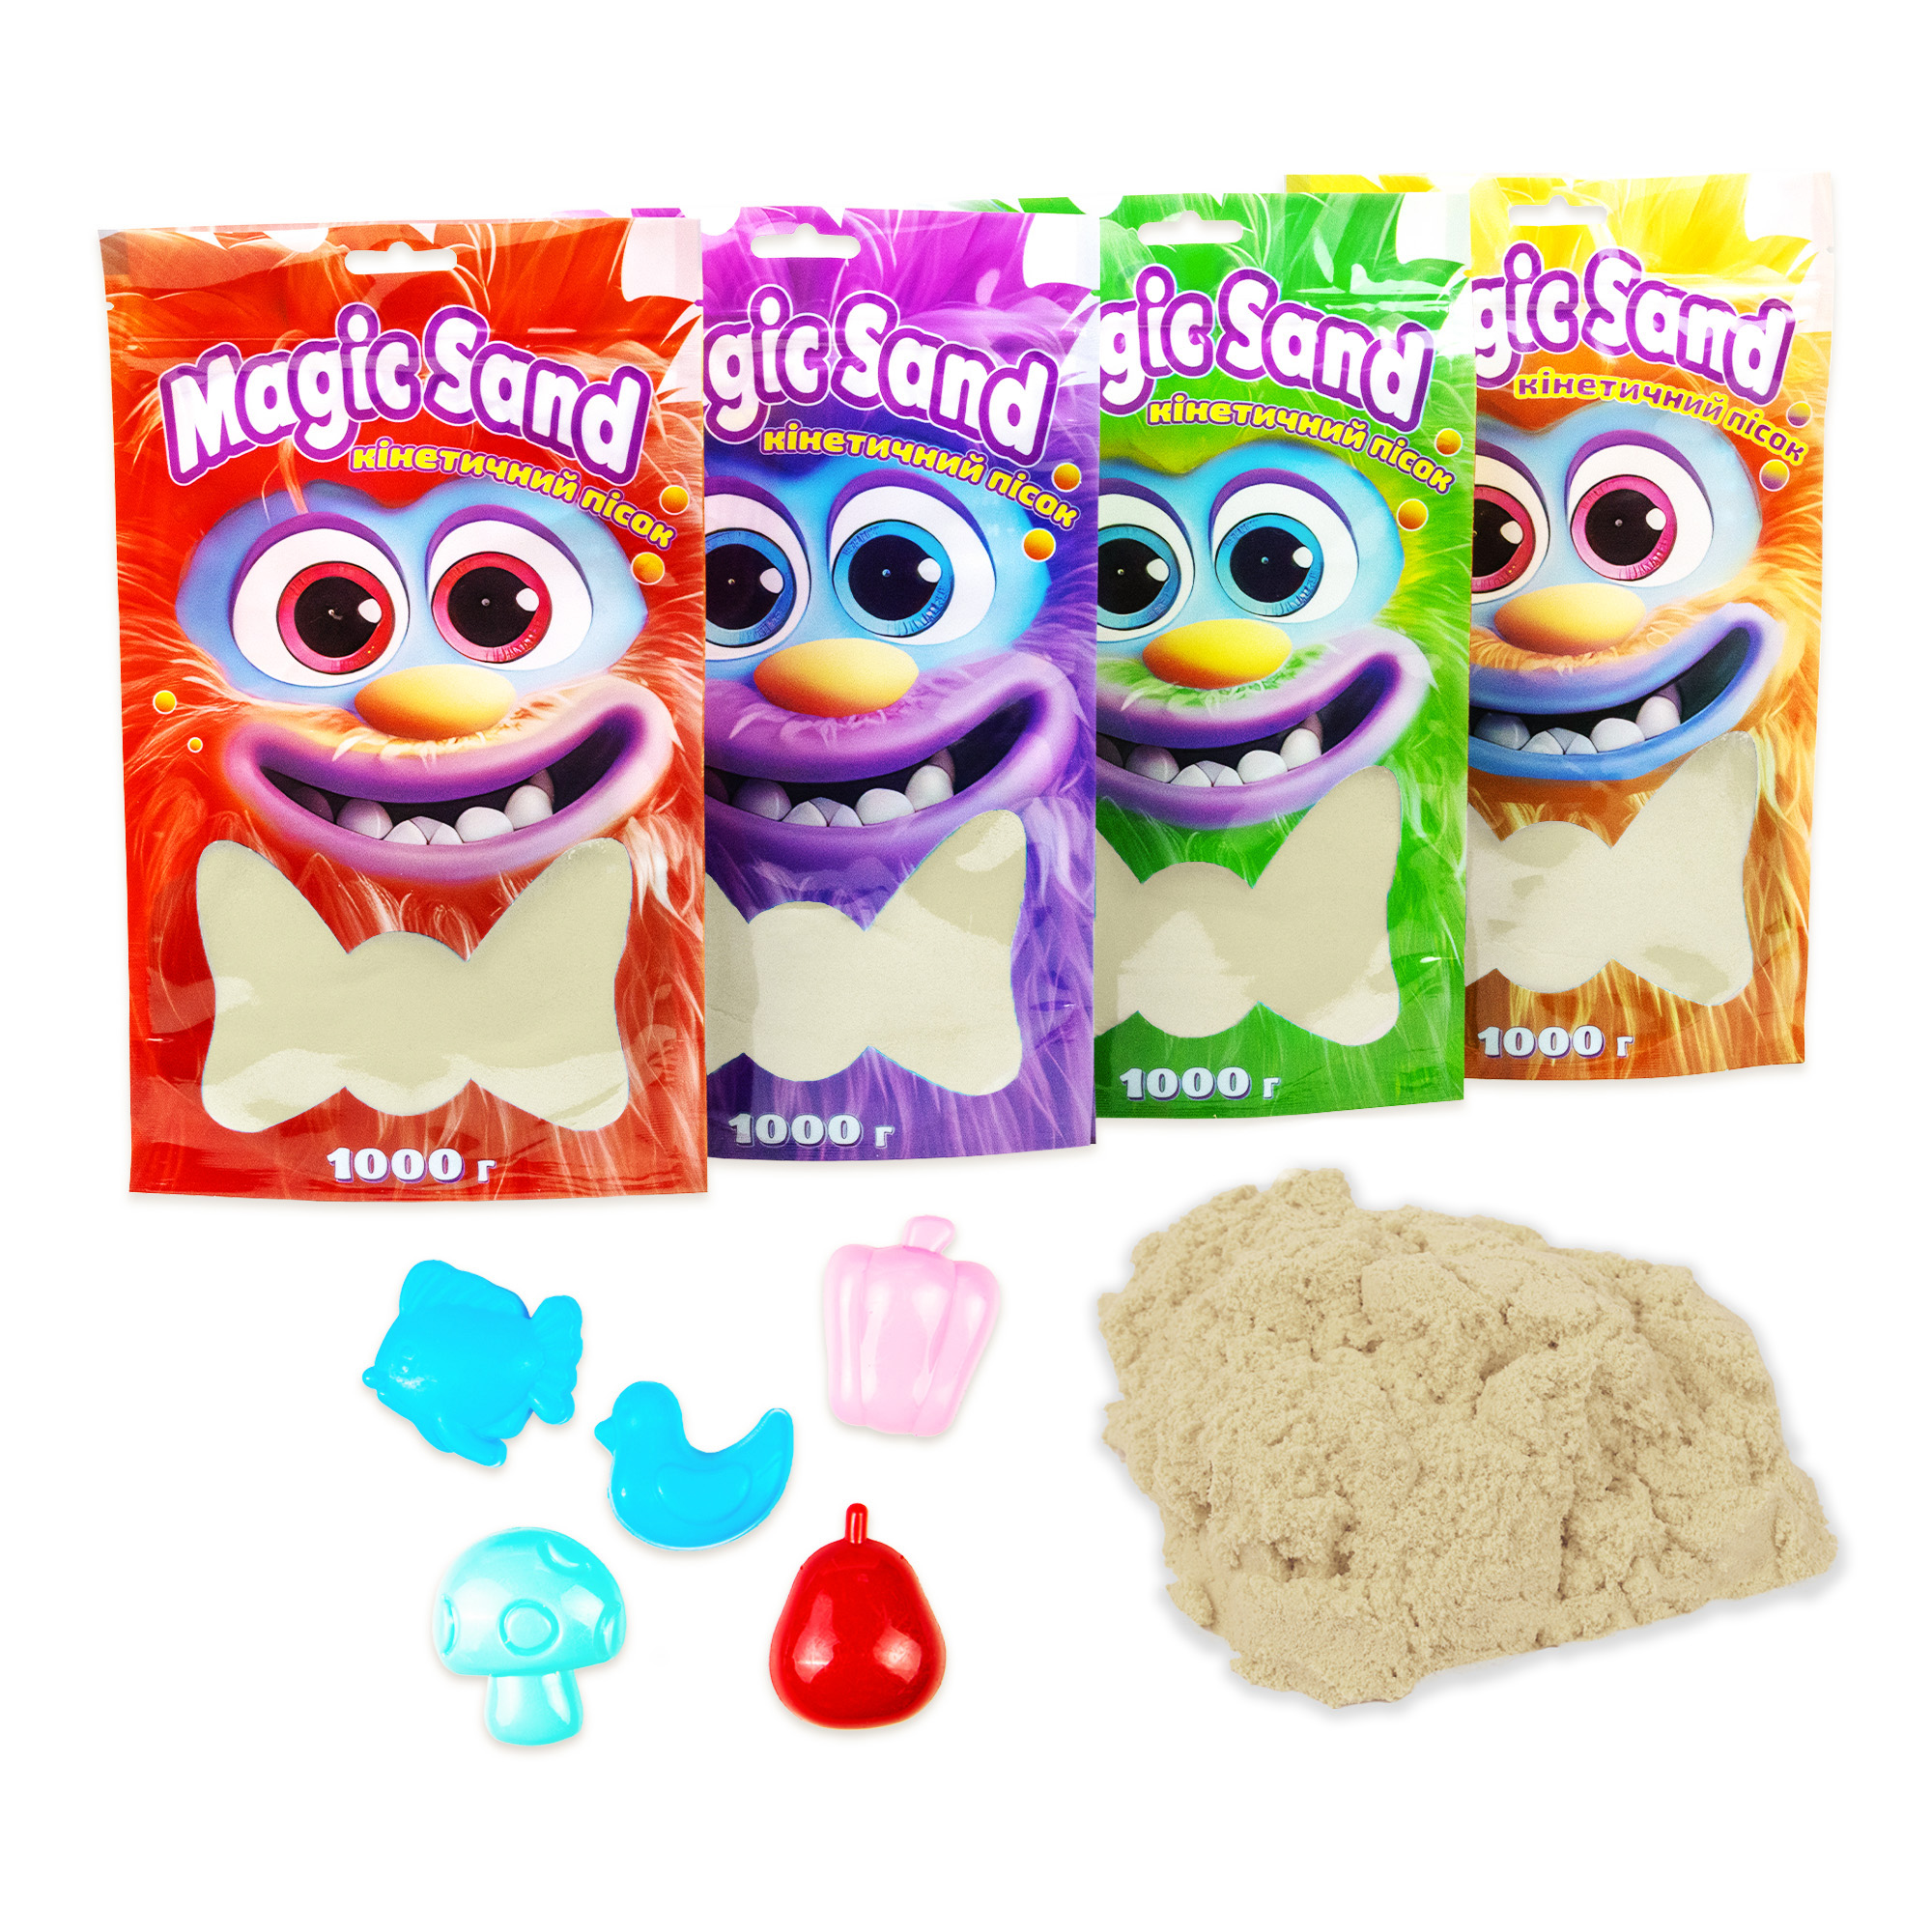 Kinetic sand Strateg Magic sand in a package 39404-1 classic, 1 kg